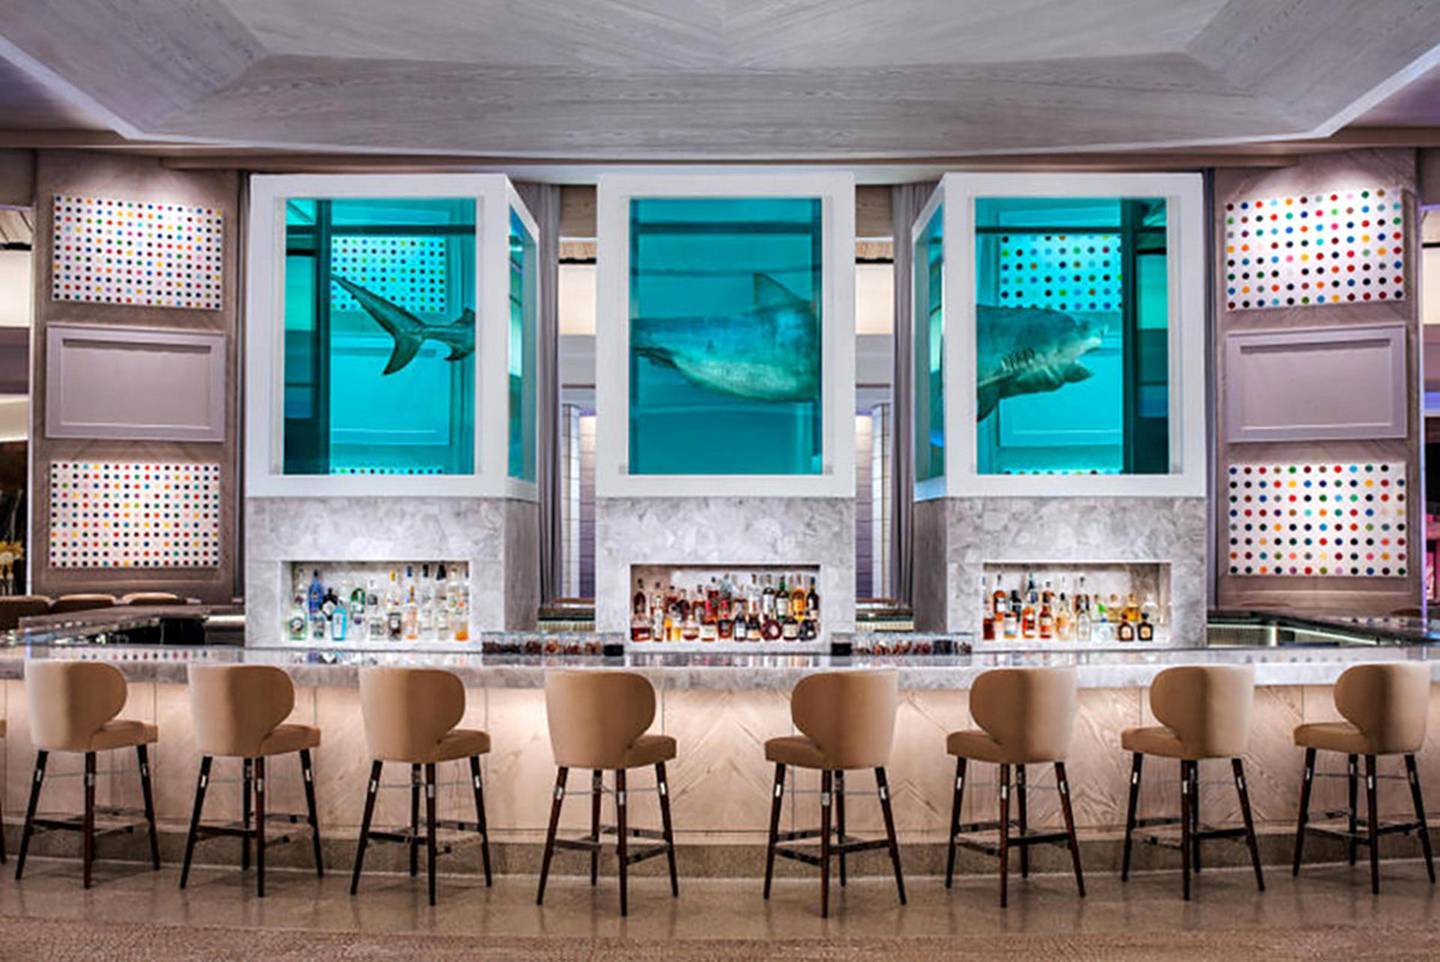 A shark suspended in formaldehyde within the suite. Courtesy Clint Jenkins